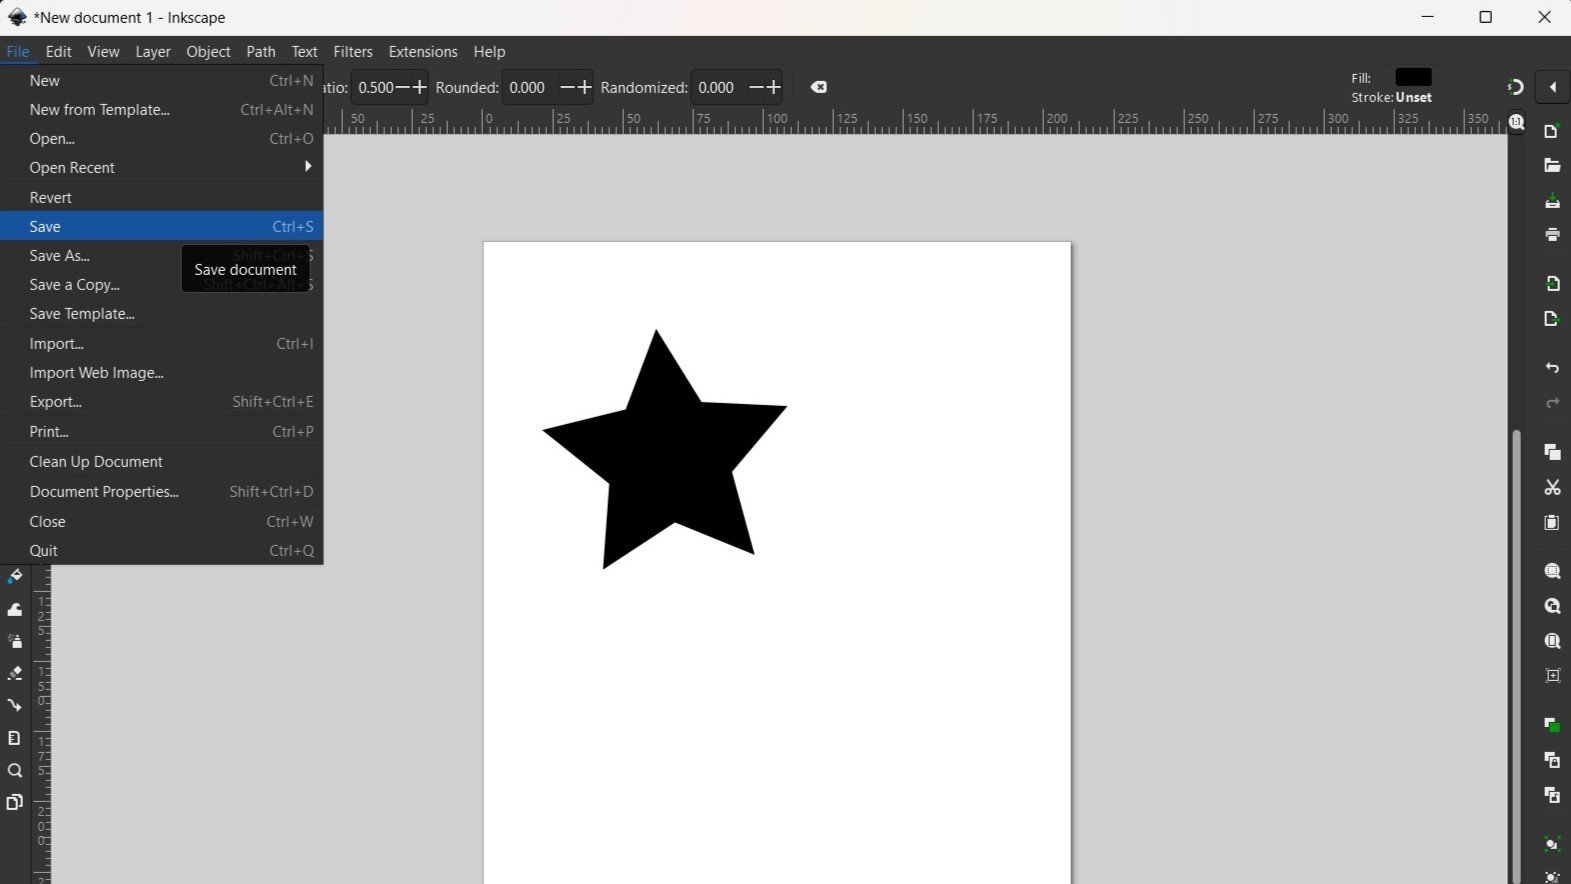 Unicorn g code extension for inkscape download